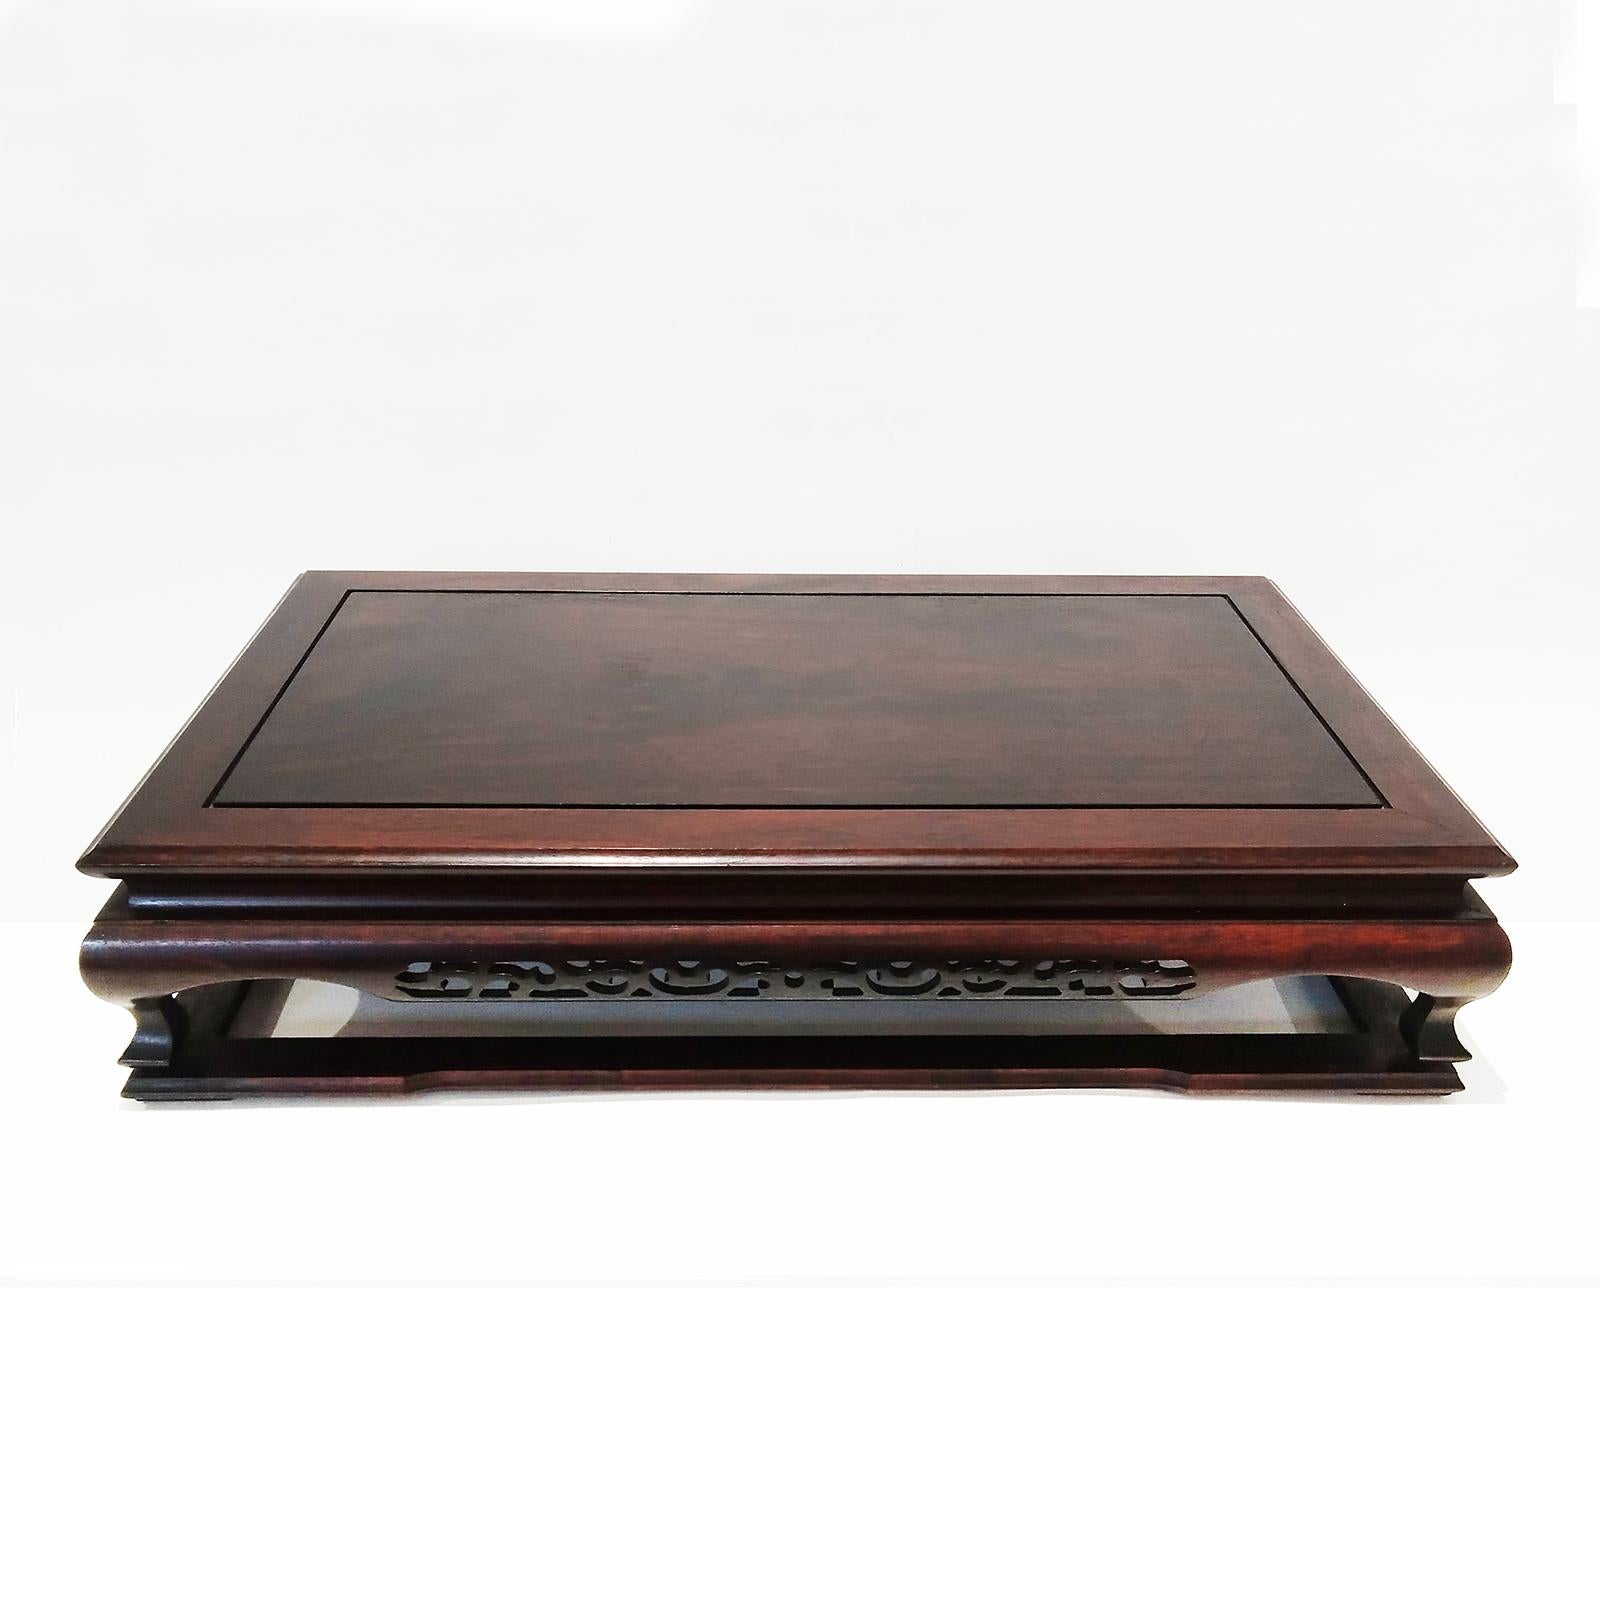 A small, beautifully preserved tray table, hand-carved in teak and stained in rich dark brown. Japan, Meiji period (1868-1912). 5 inches high, 22 inches wide, 13 inches deep. Original finish. 